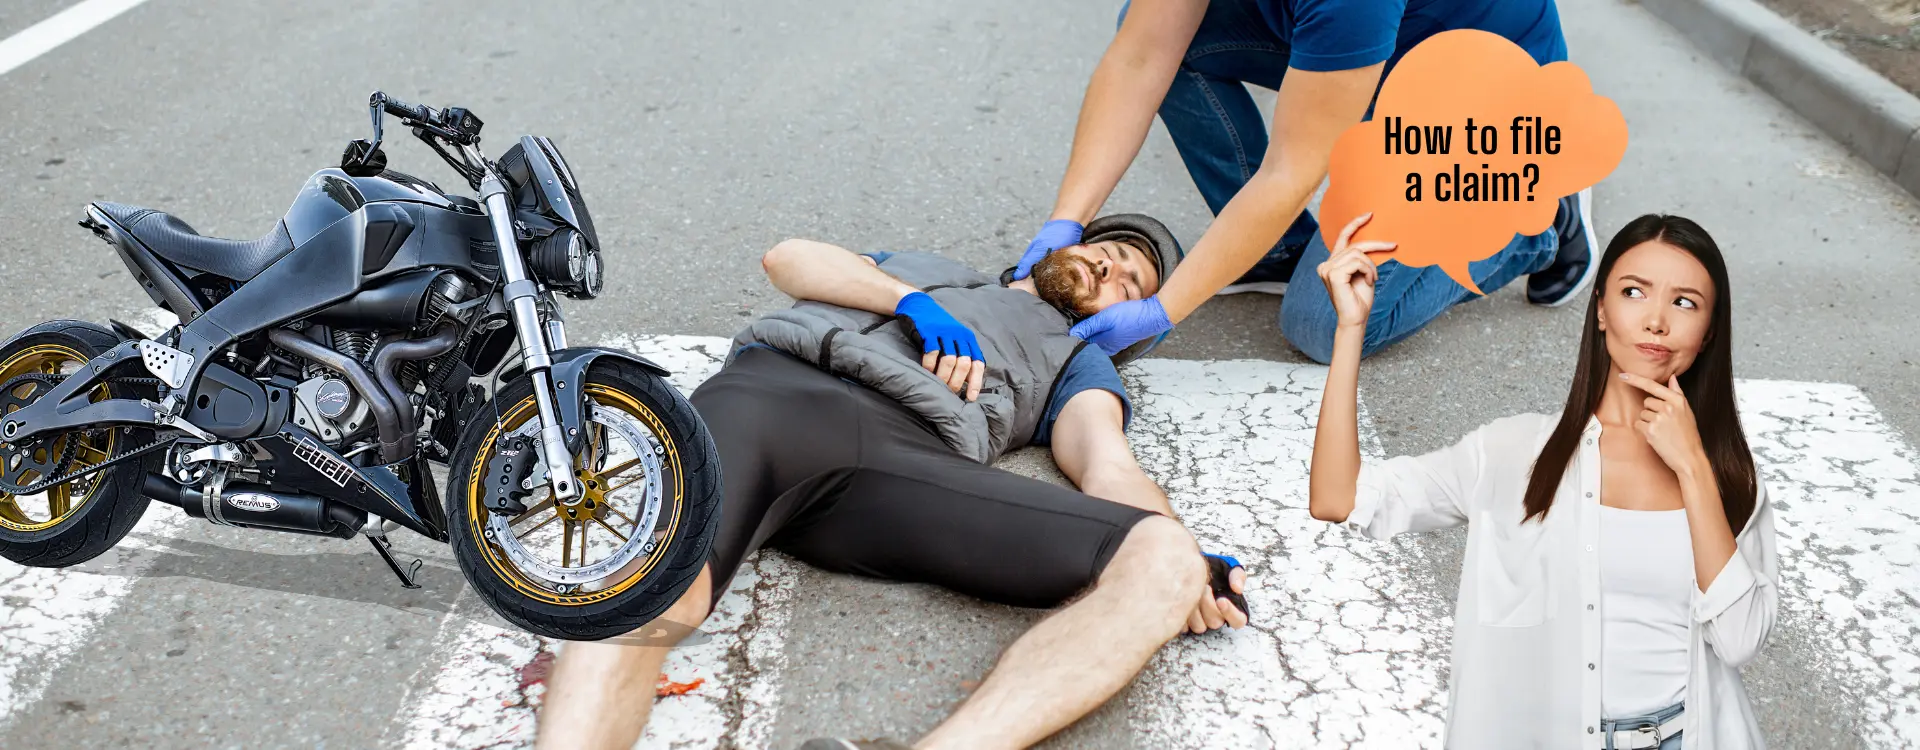 how to file a motorcycle accident claim for injury